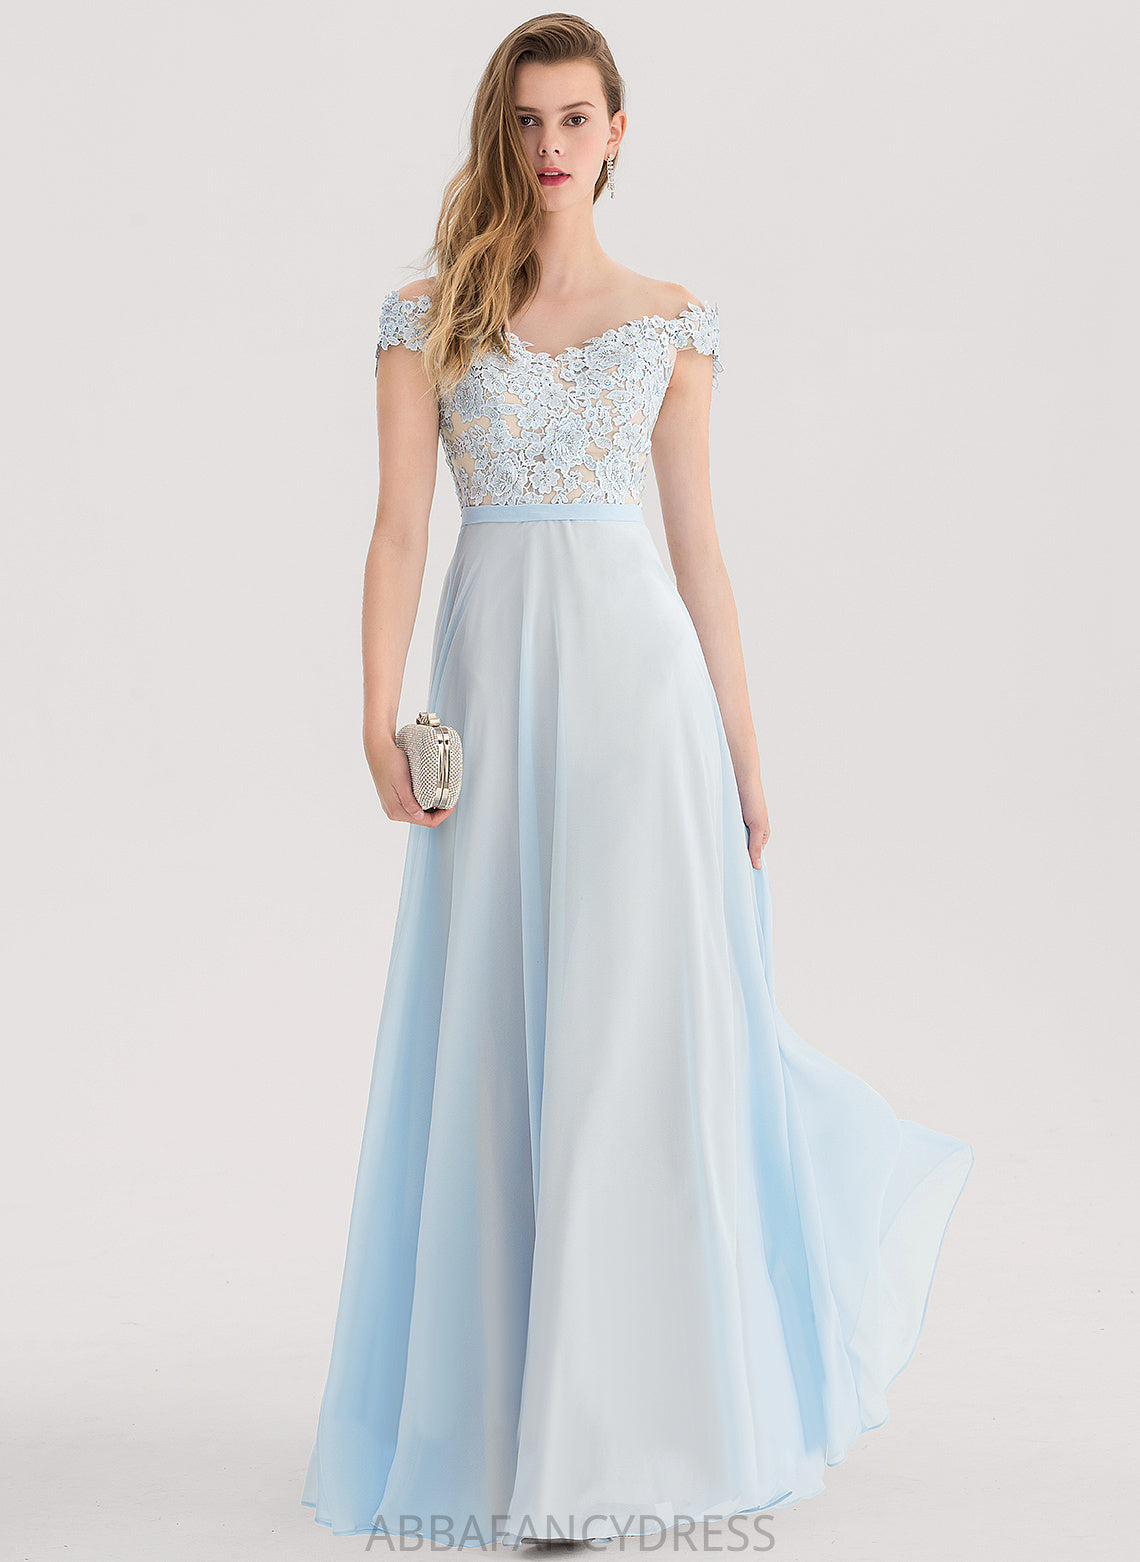 Lace Off-the-Shoulder Mckayla Beading Sequins A-Line Prom Dresses Floor-Length With Chiffon